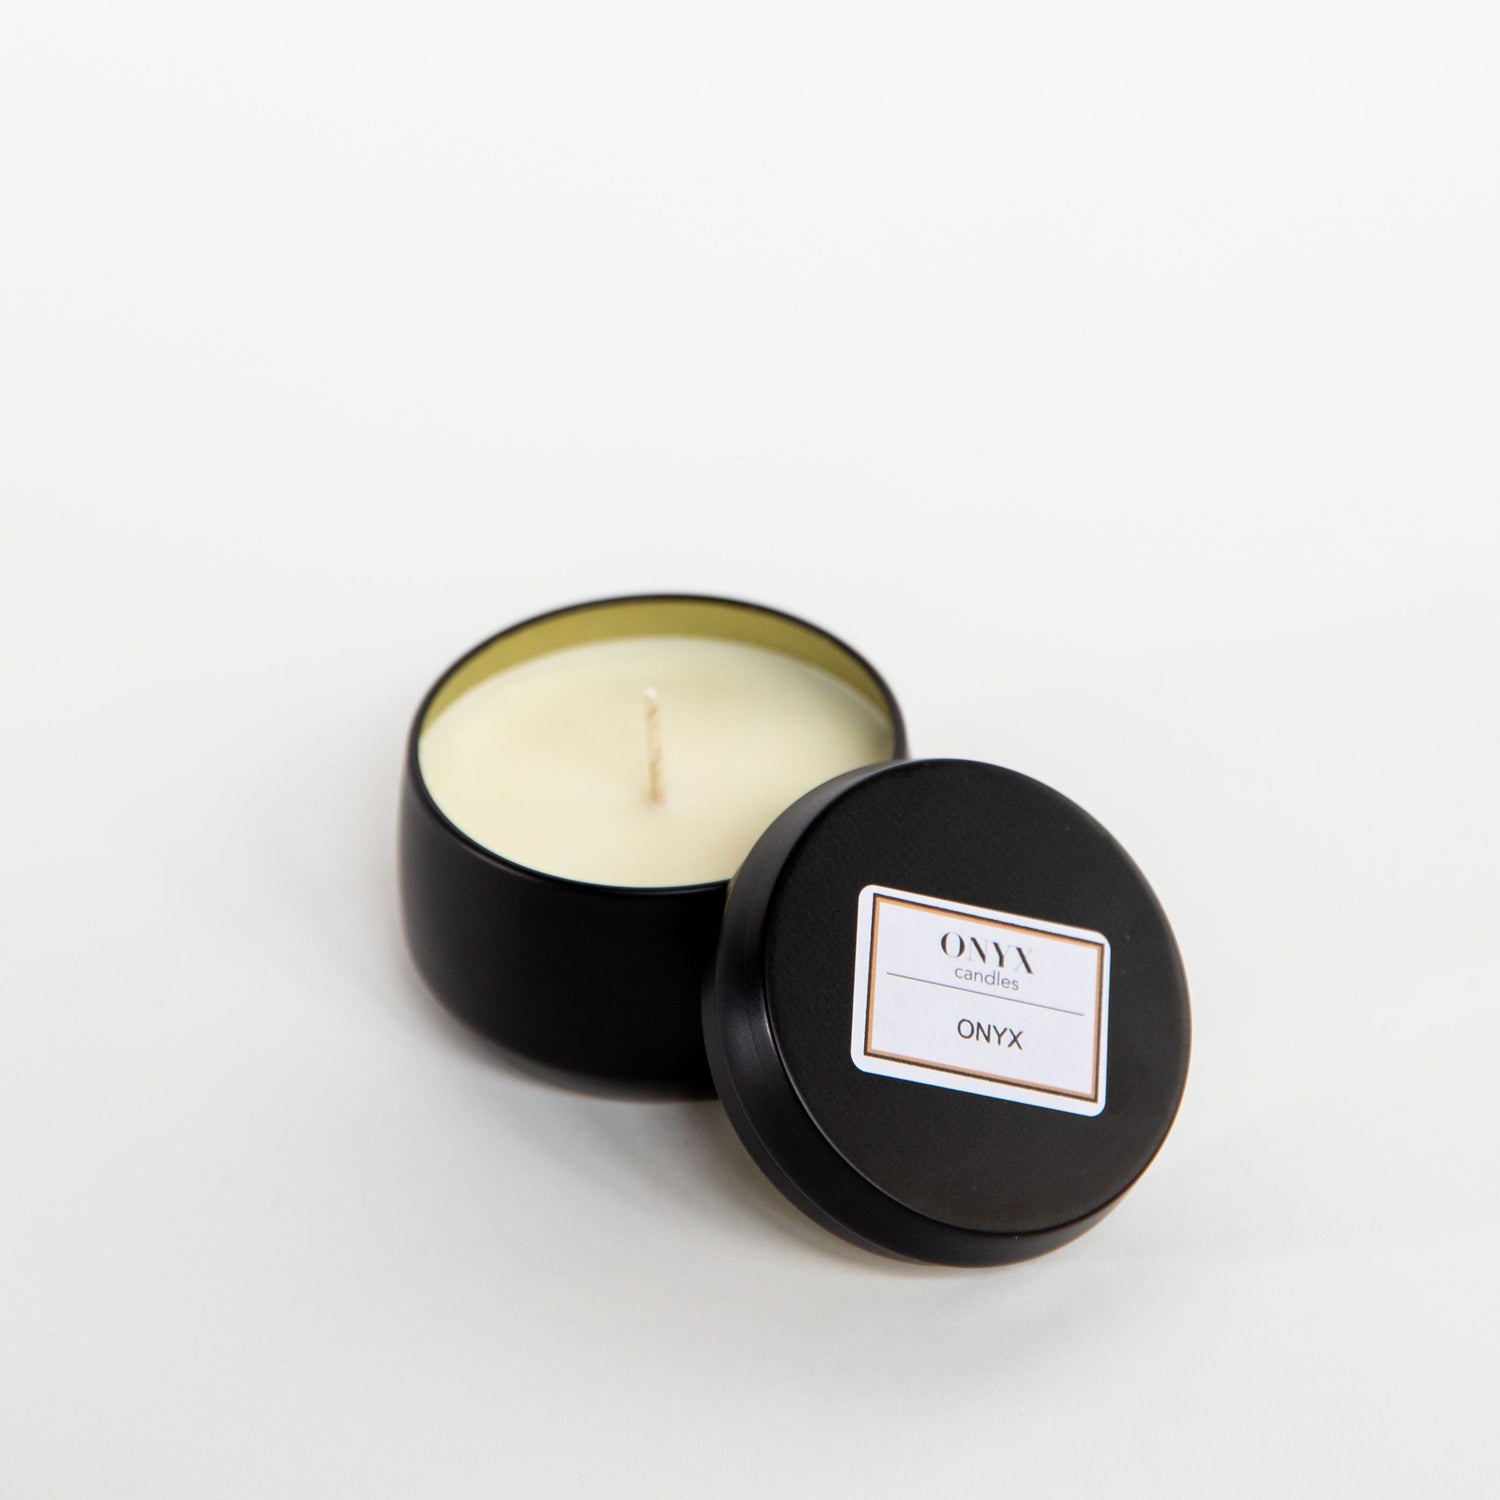 Onyx candles signature scent in a 4oz matte black tin